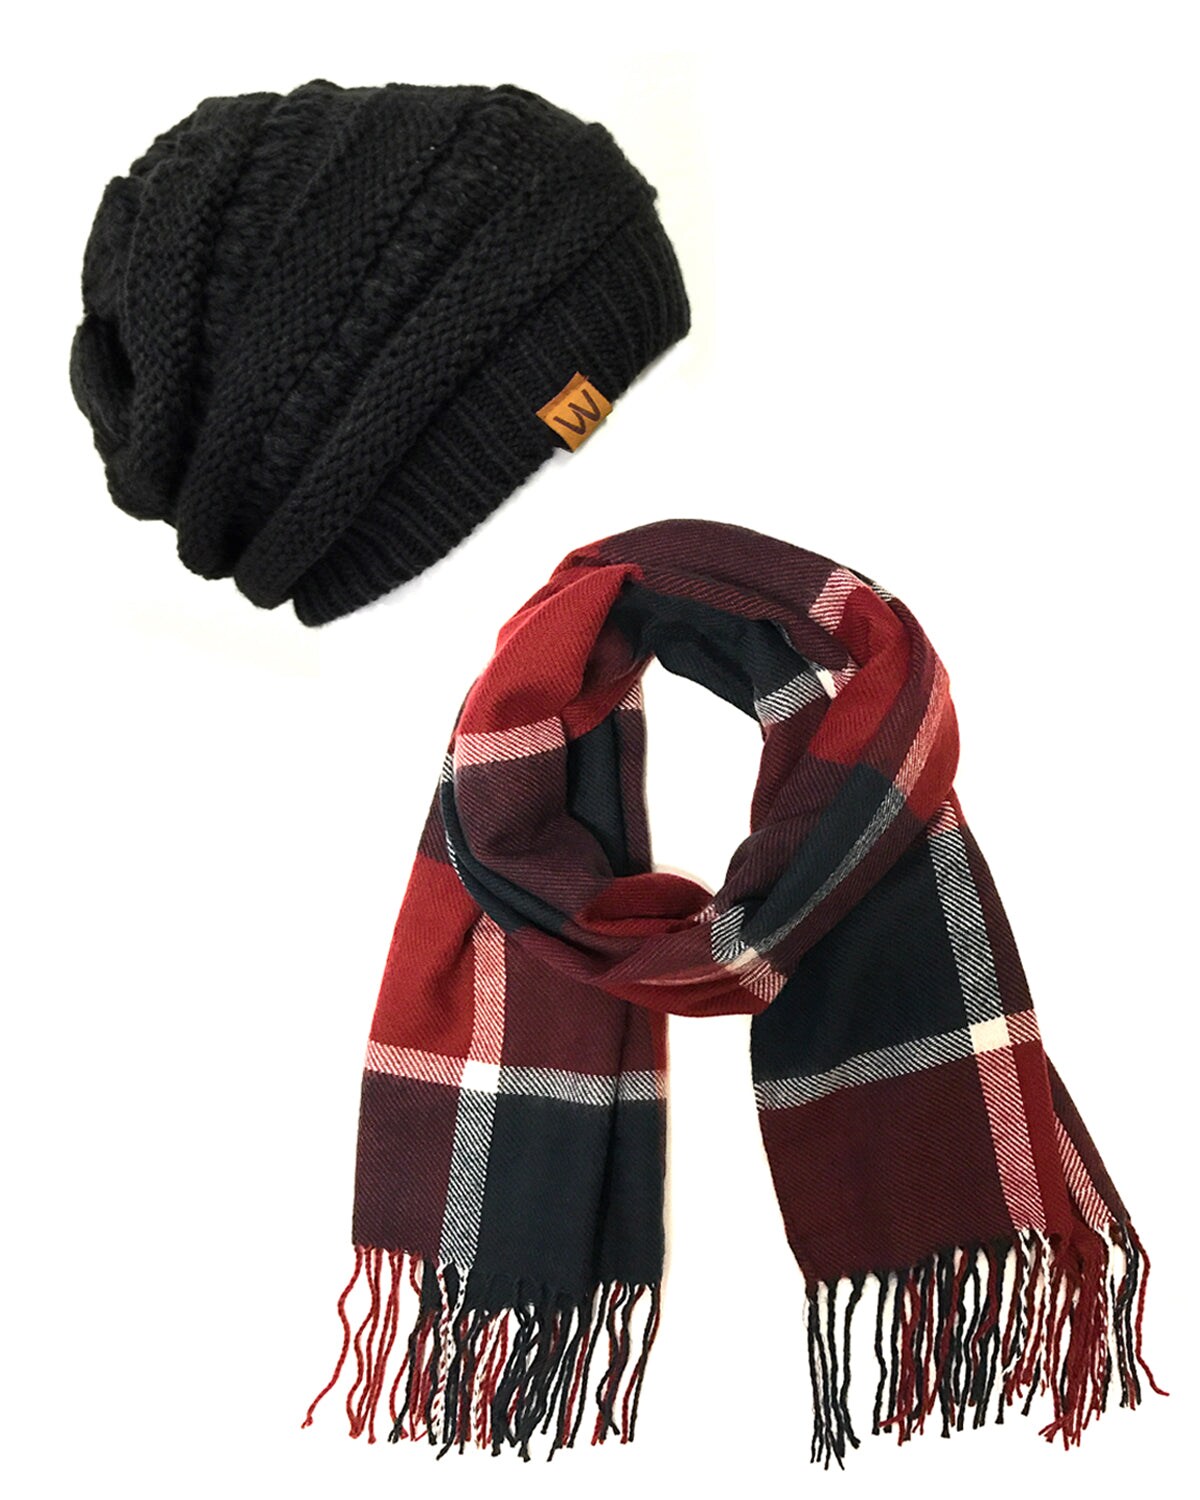 Wrapables Plaid Print Long Winter Warm Scarf and Beanie Hat Set, Navy / Wine + Black Beanie